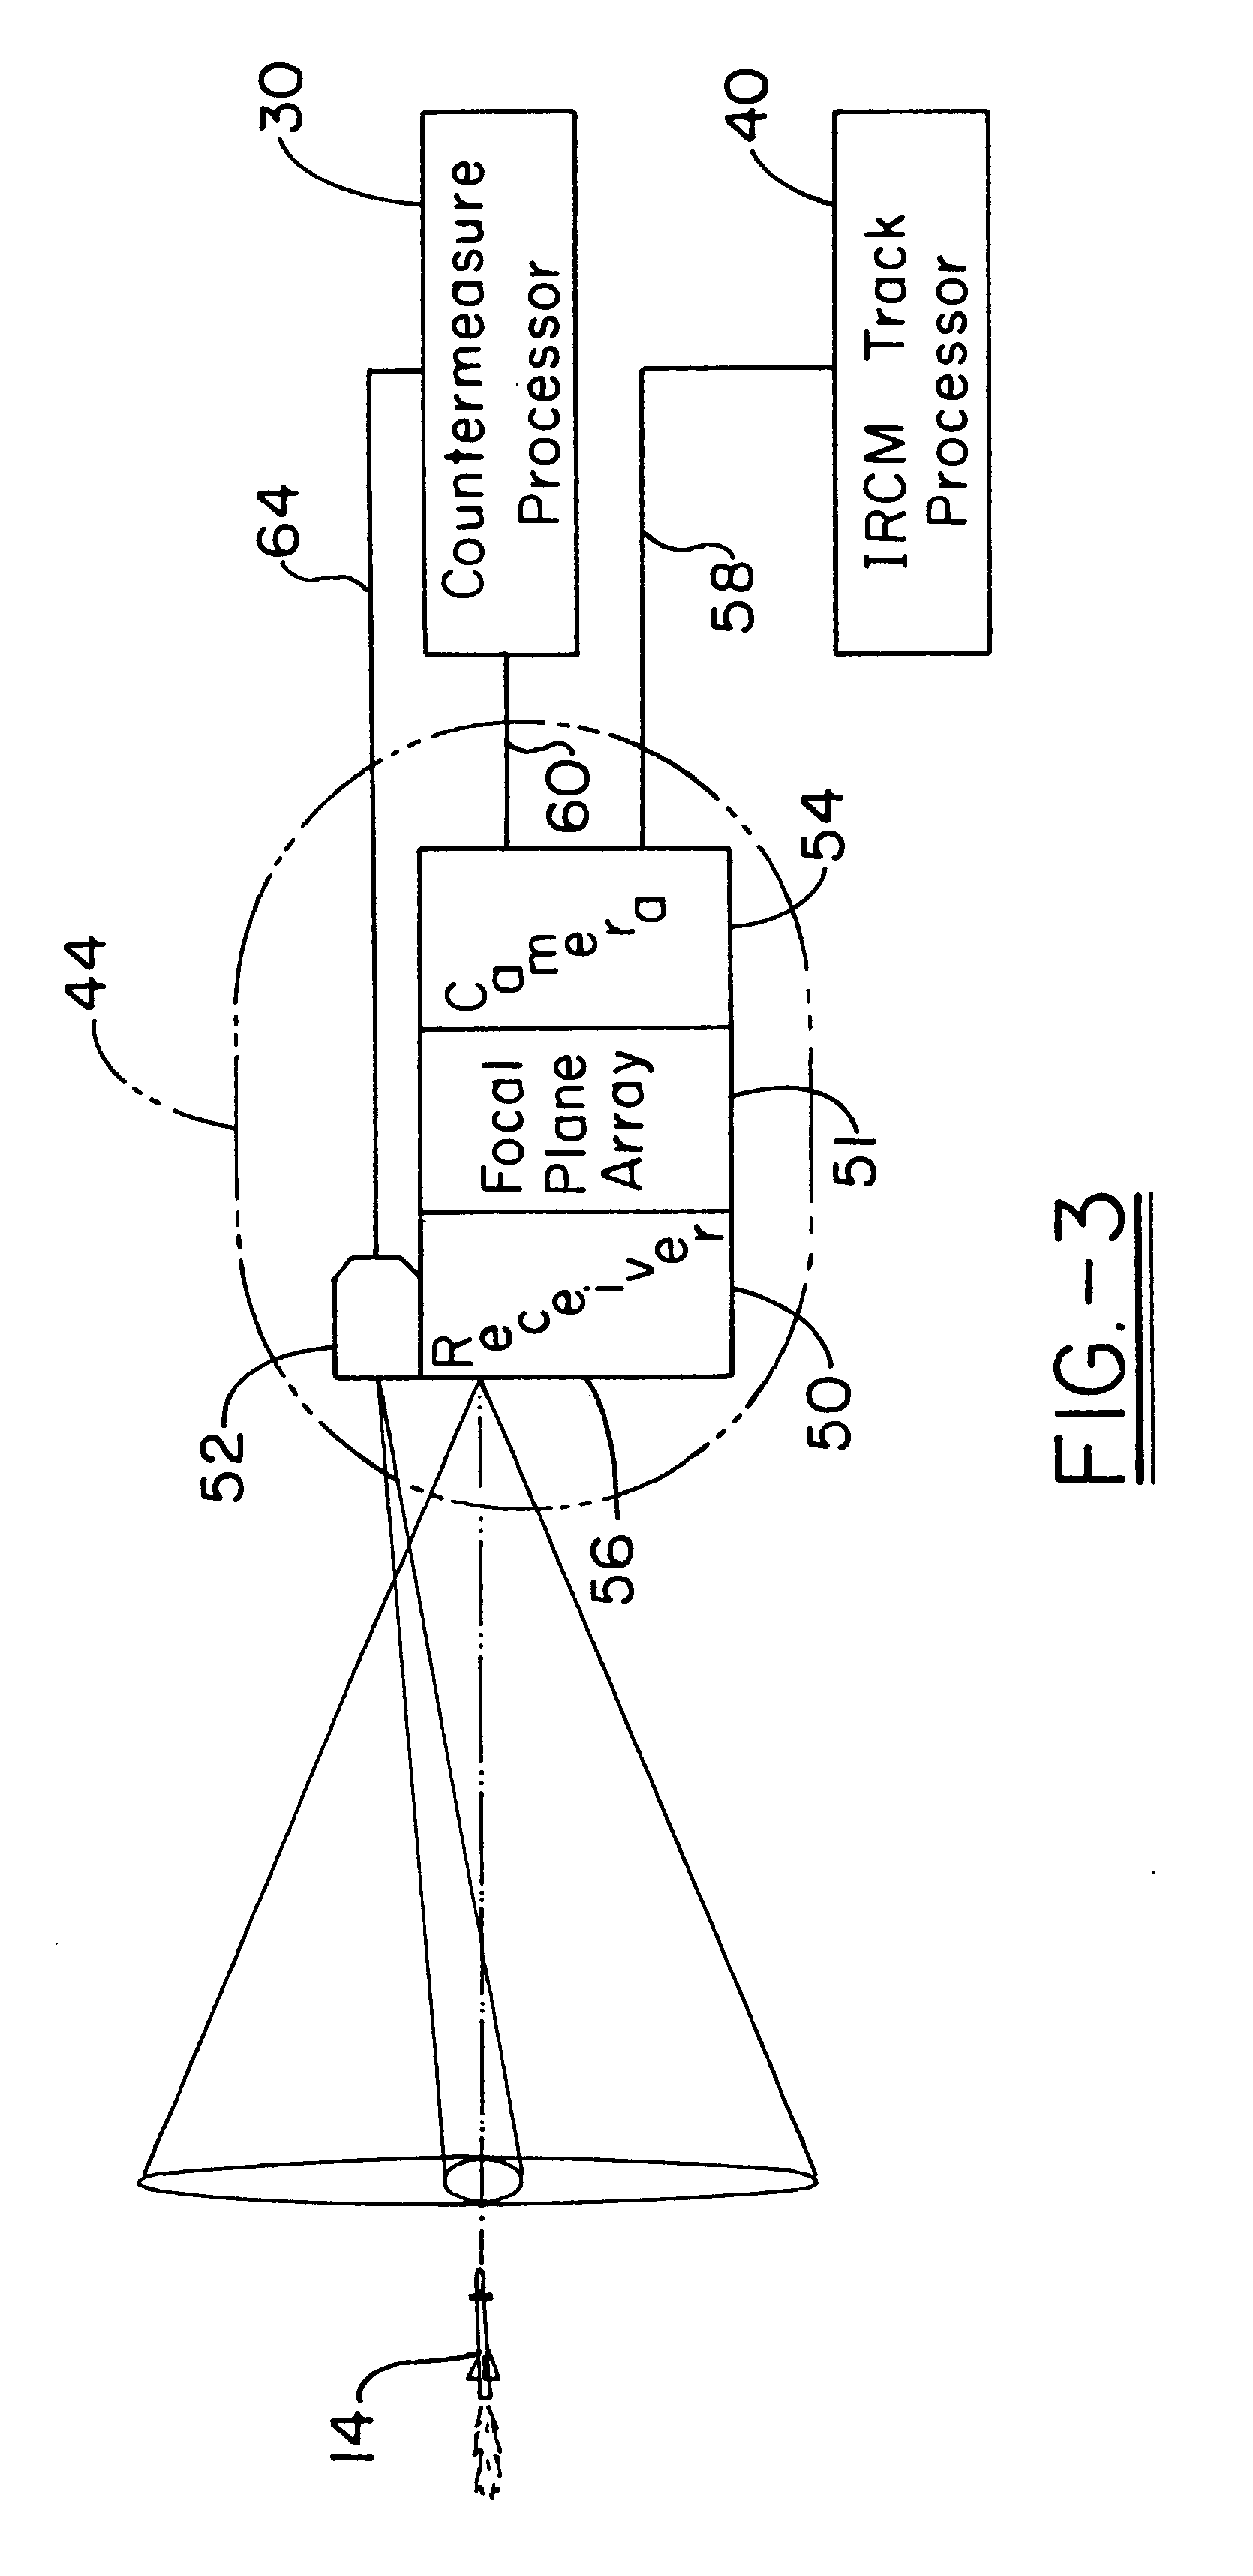 Closed-loop infrared countermeasure system using high frame rate infrared receiver